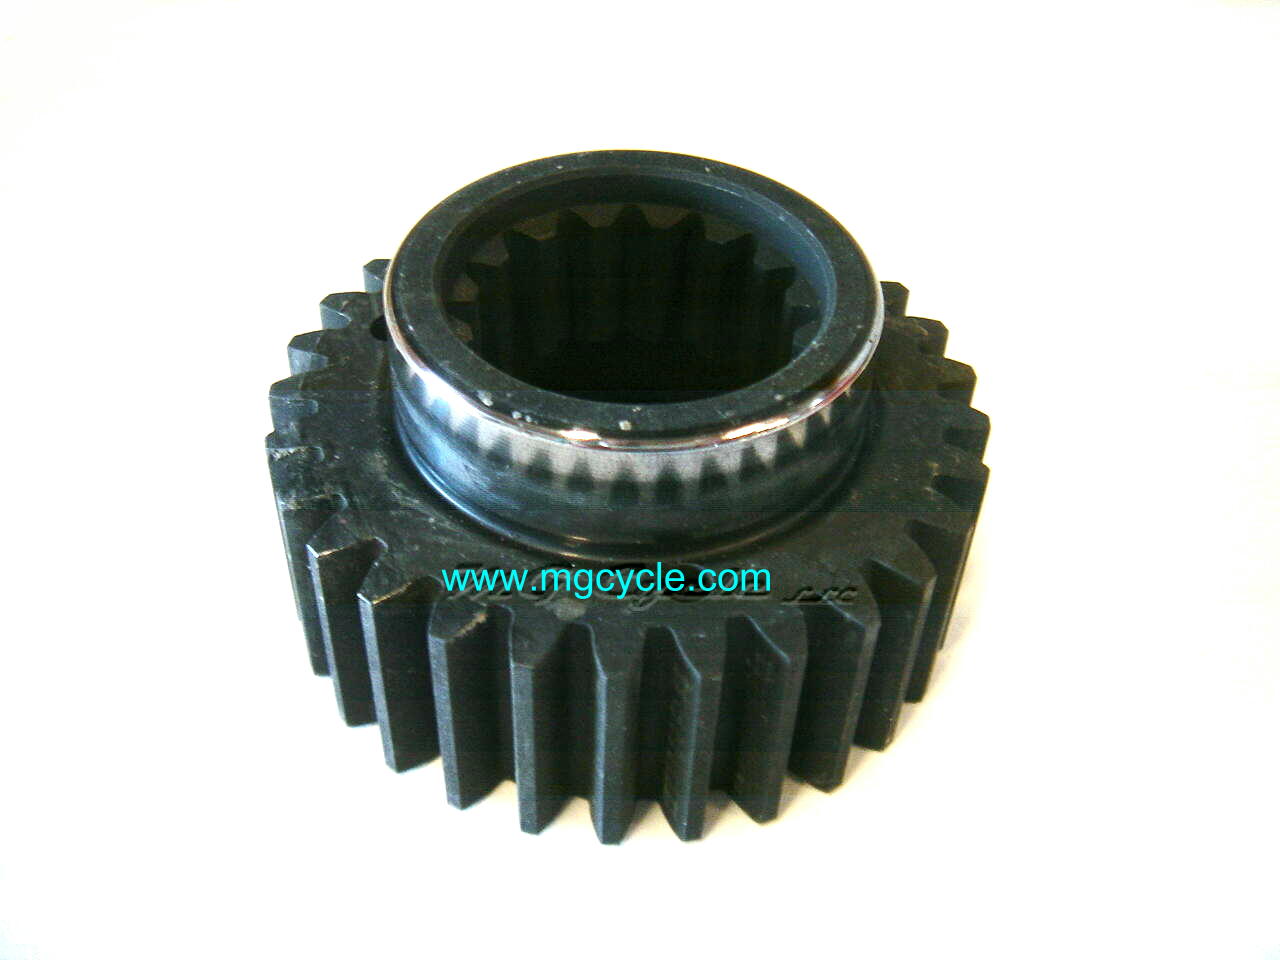 Clutch hub for 6 speed spine frames 1999-2005 GU04211600 - Click Image to Close